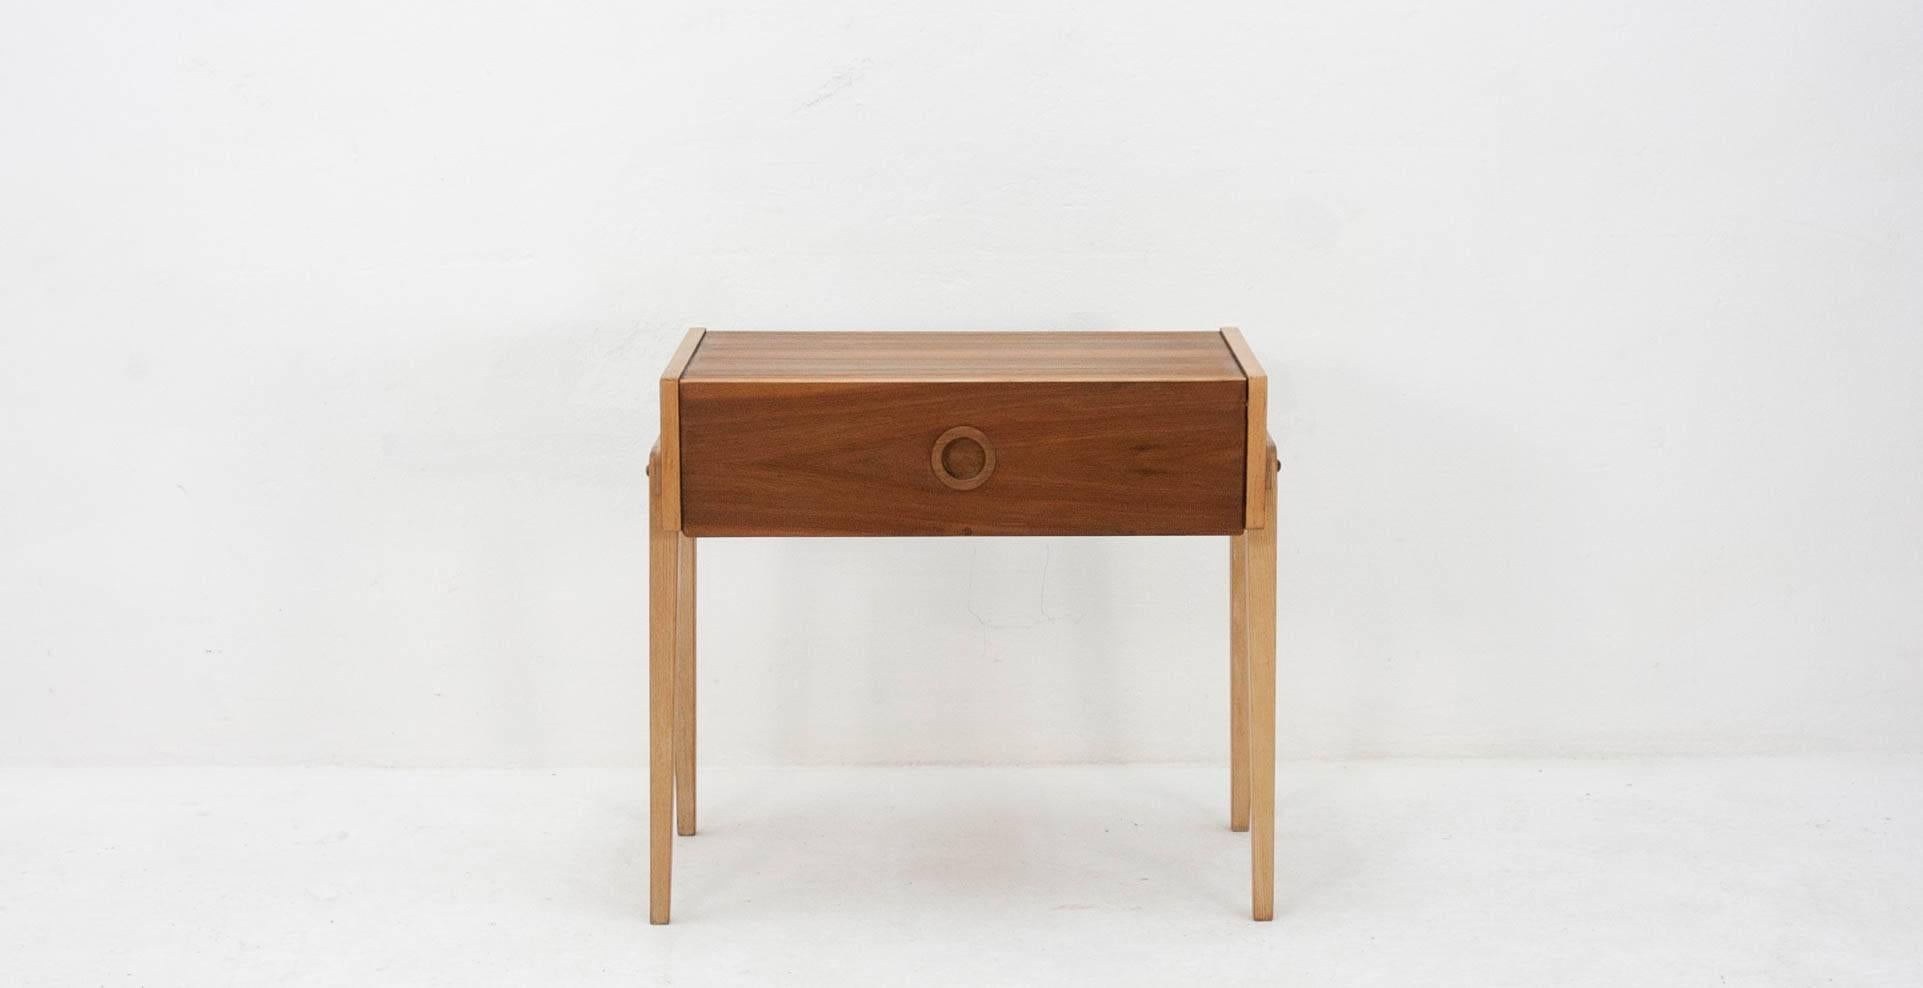 Quirky little sideboard with a fold-down front and a nicely grained top surface.